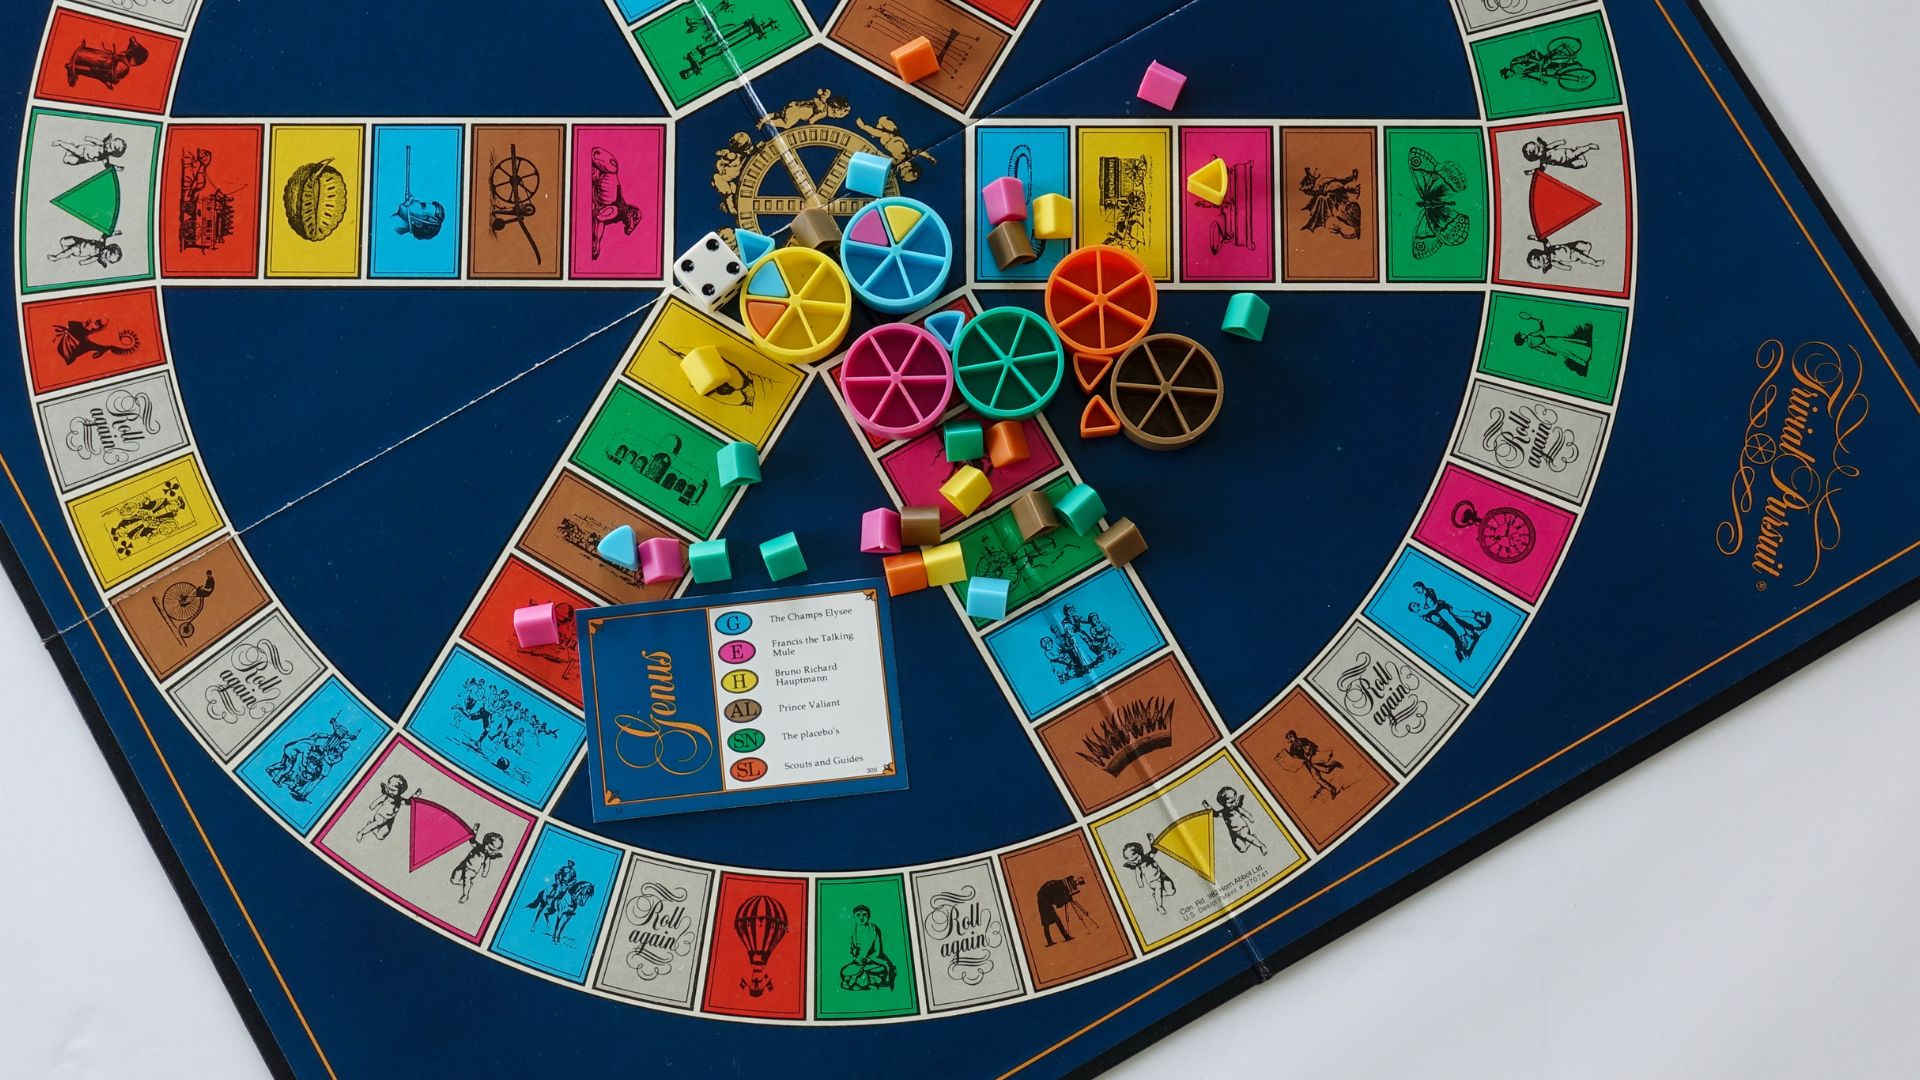 The Bookseller - Rights - Farshore scores official Trivial Pursuit